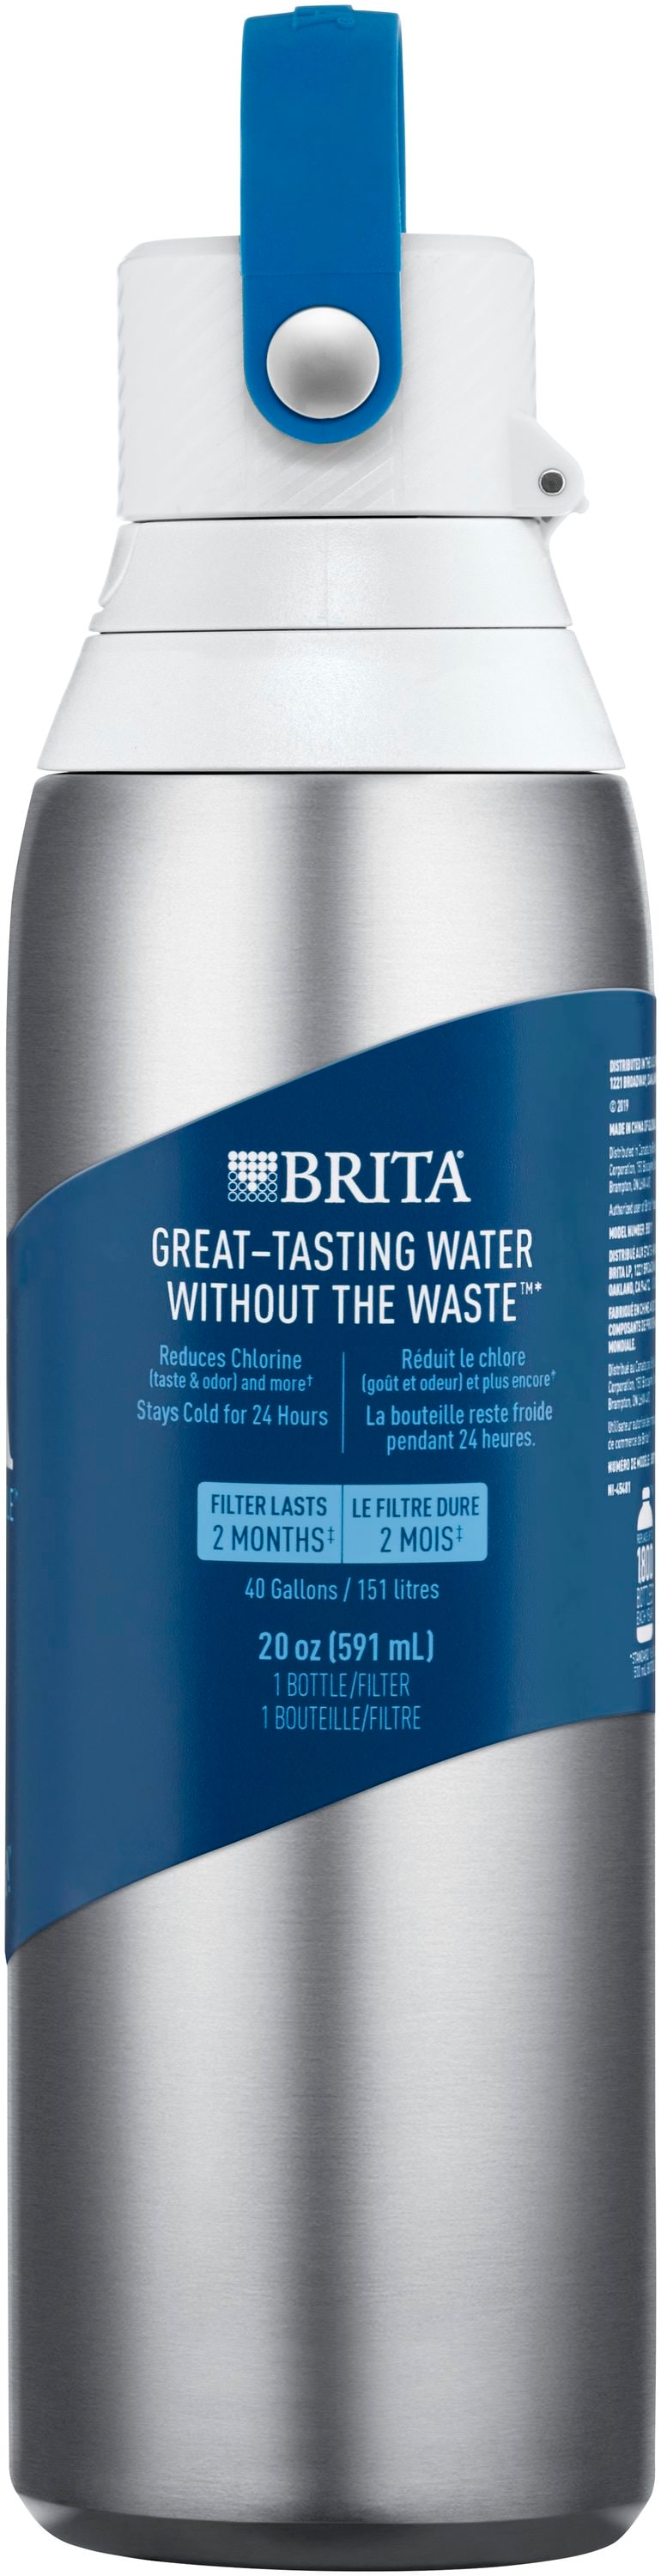 Brita 20oz Premium Double Wall Stainless Steel Insulated Filtered Water  Bottle - Light Blue